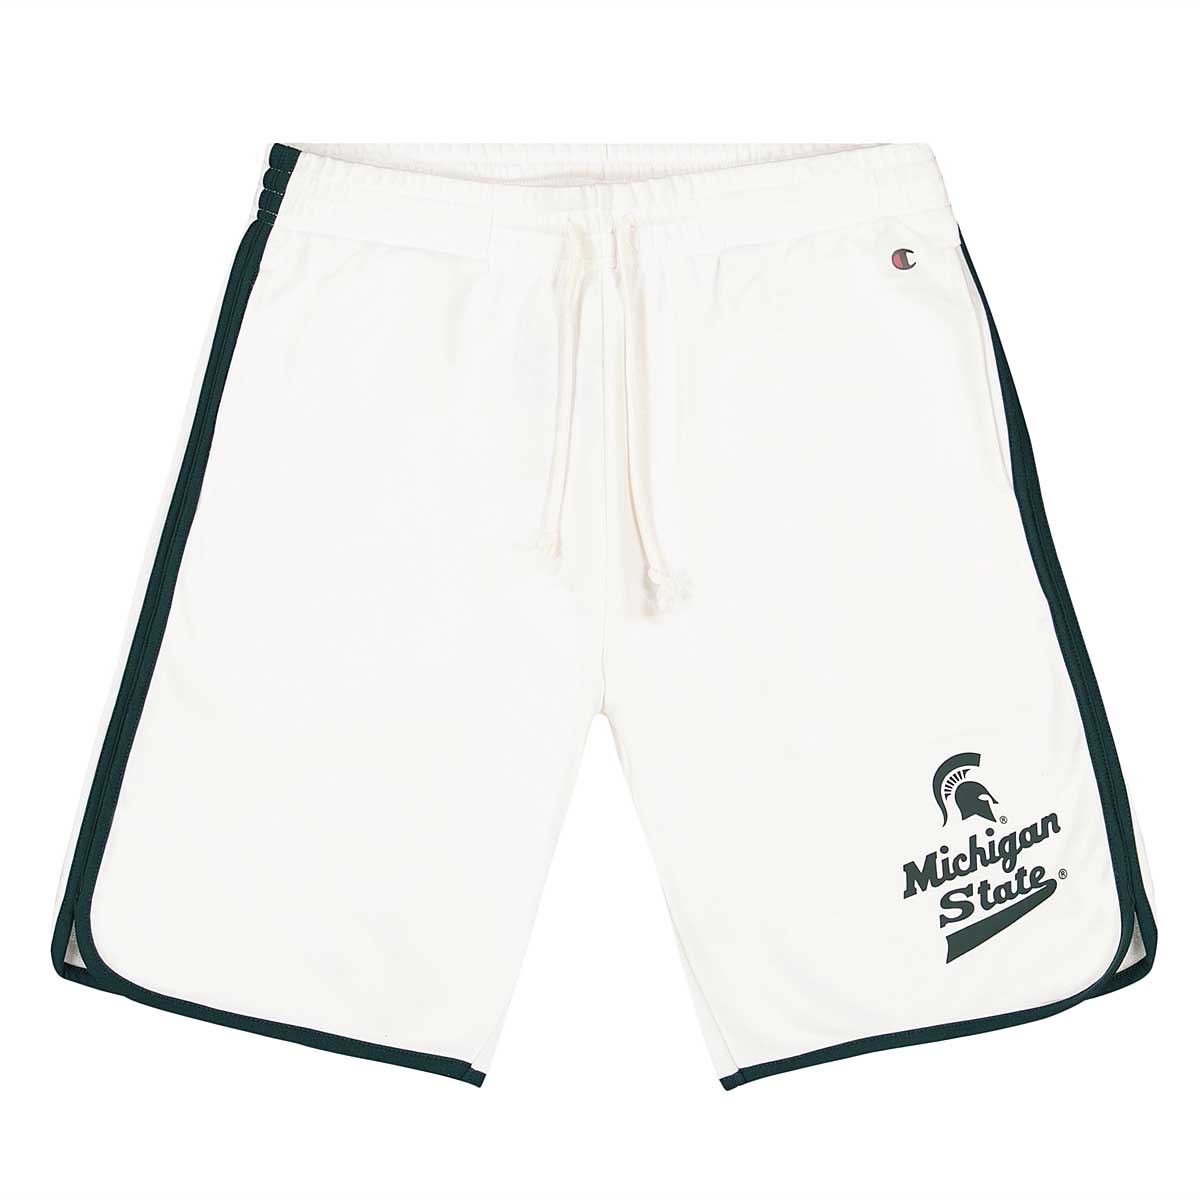 Buy NCAA MICHIGAN STATE SPARTANS SWEAT SHORTS for N/A 0.0 on KICKZ.com!